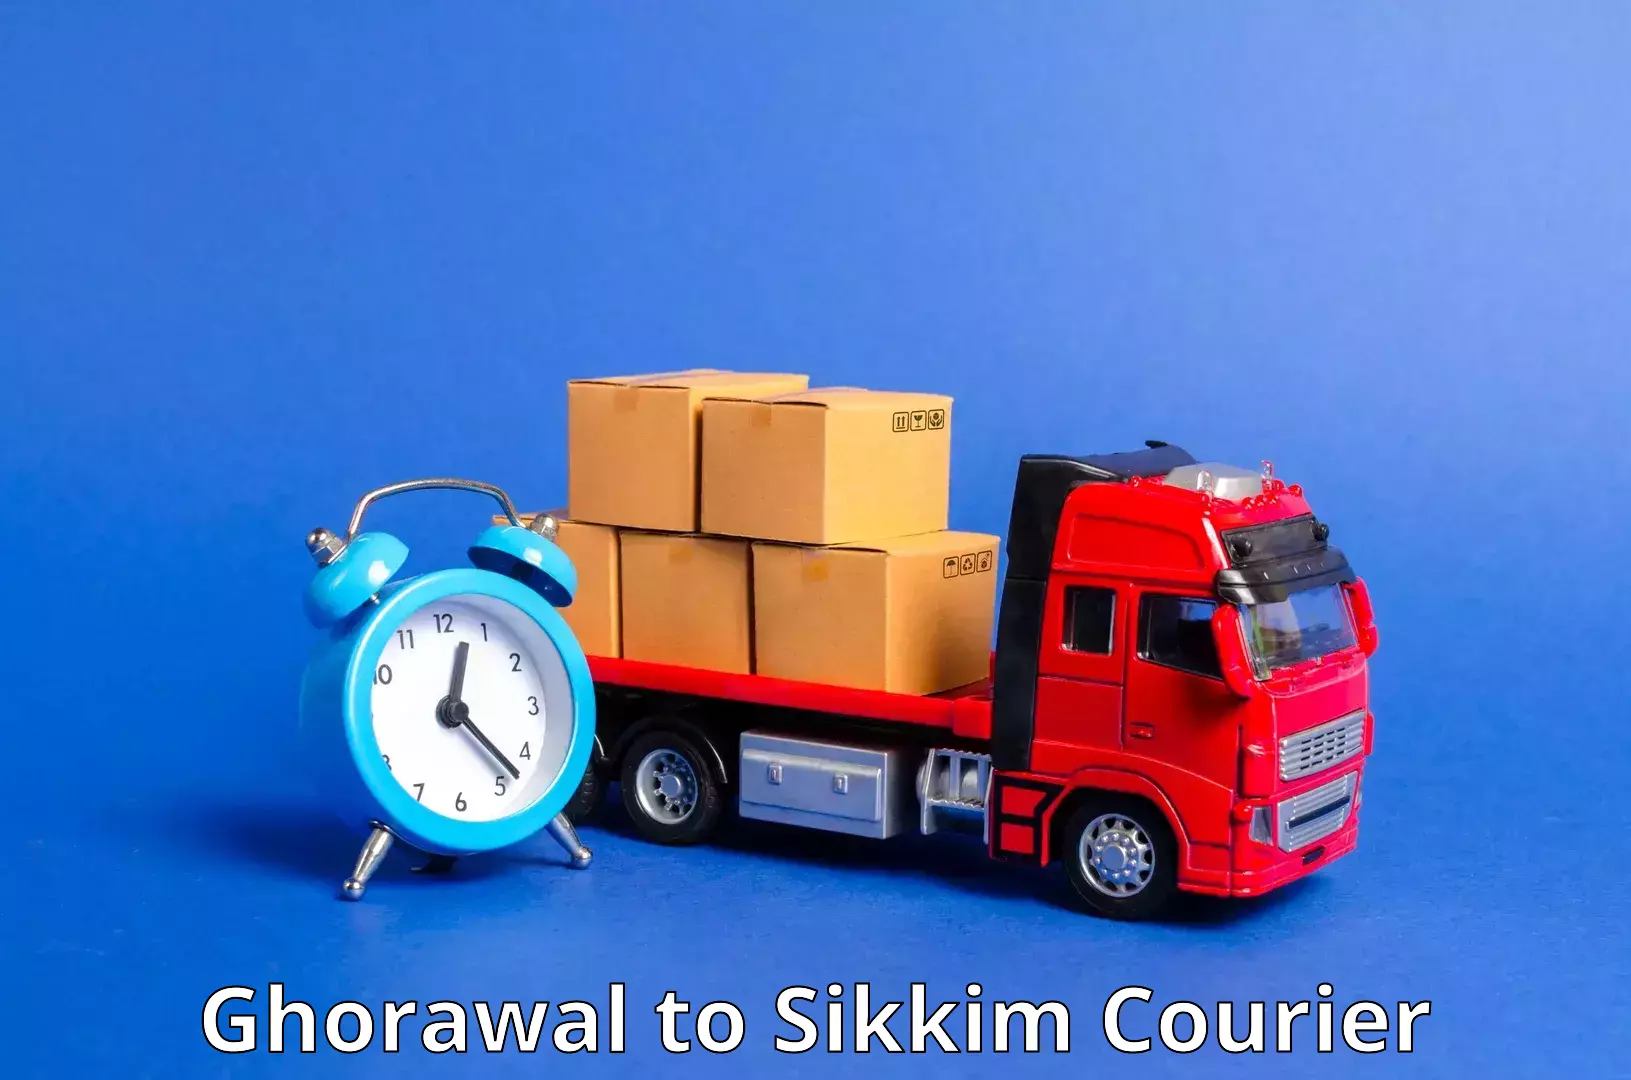 Logistics service provider Ghorawal to Sikkim